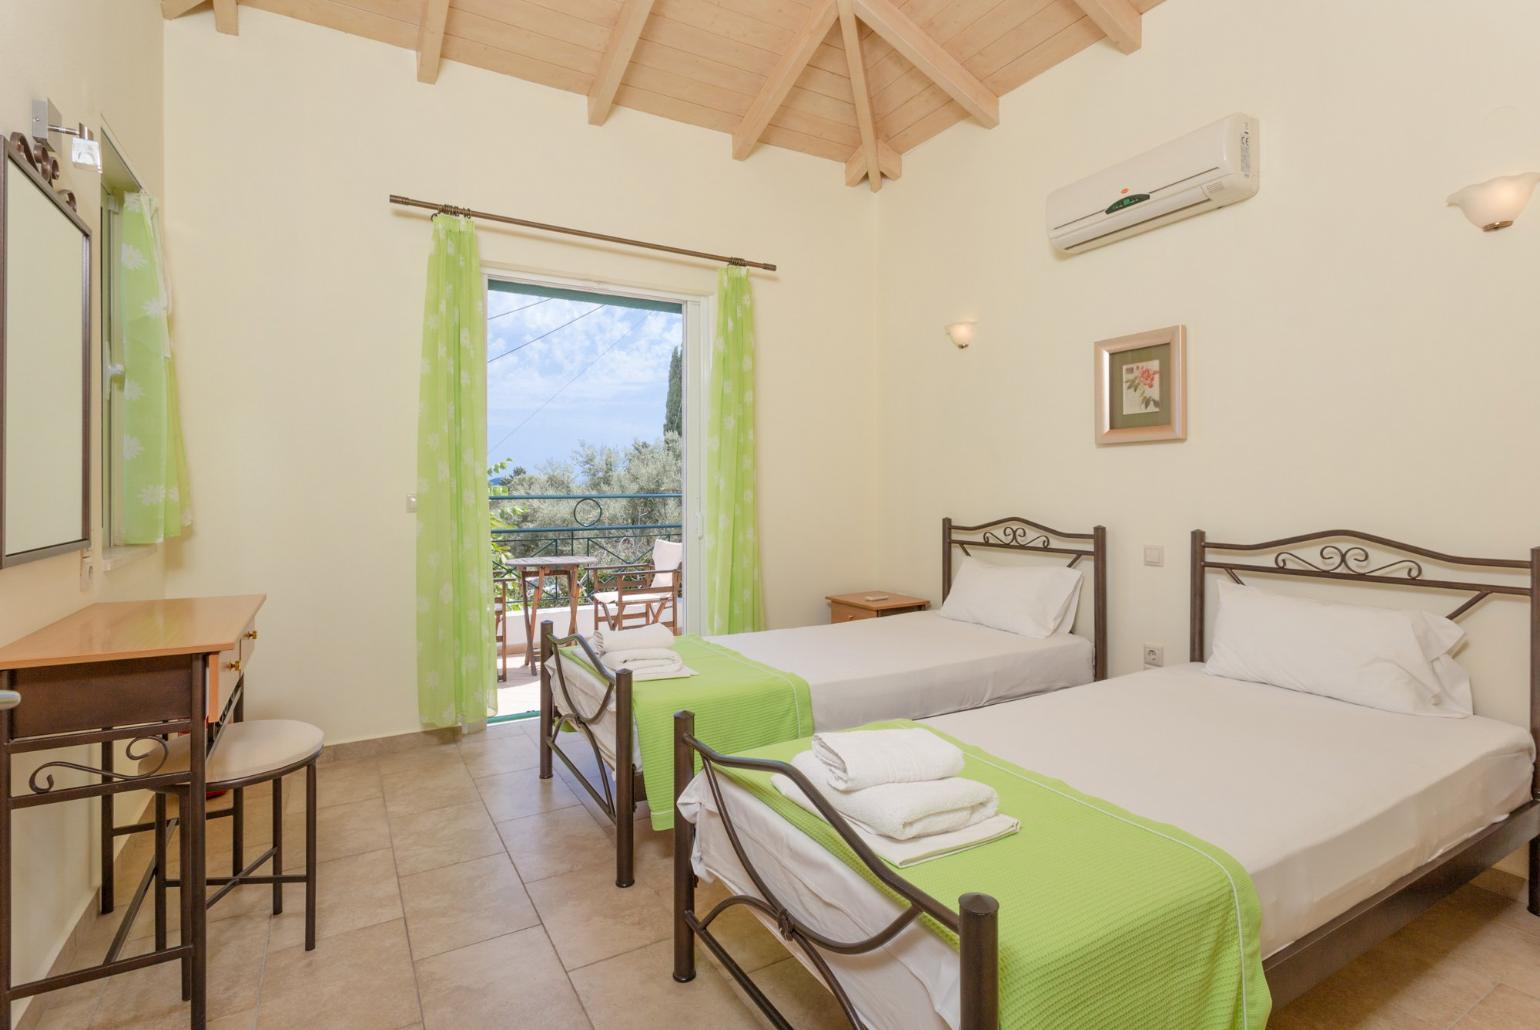 Twin bedroom with A/C and balcony with sea views